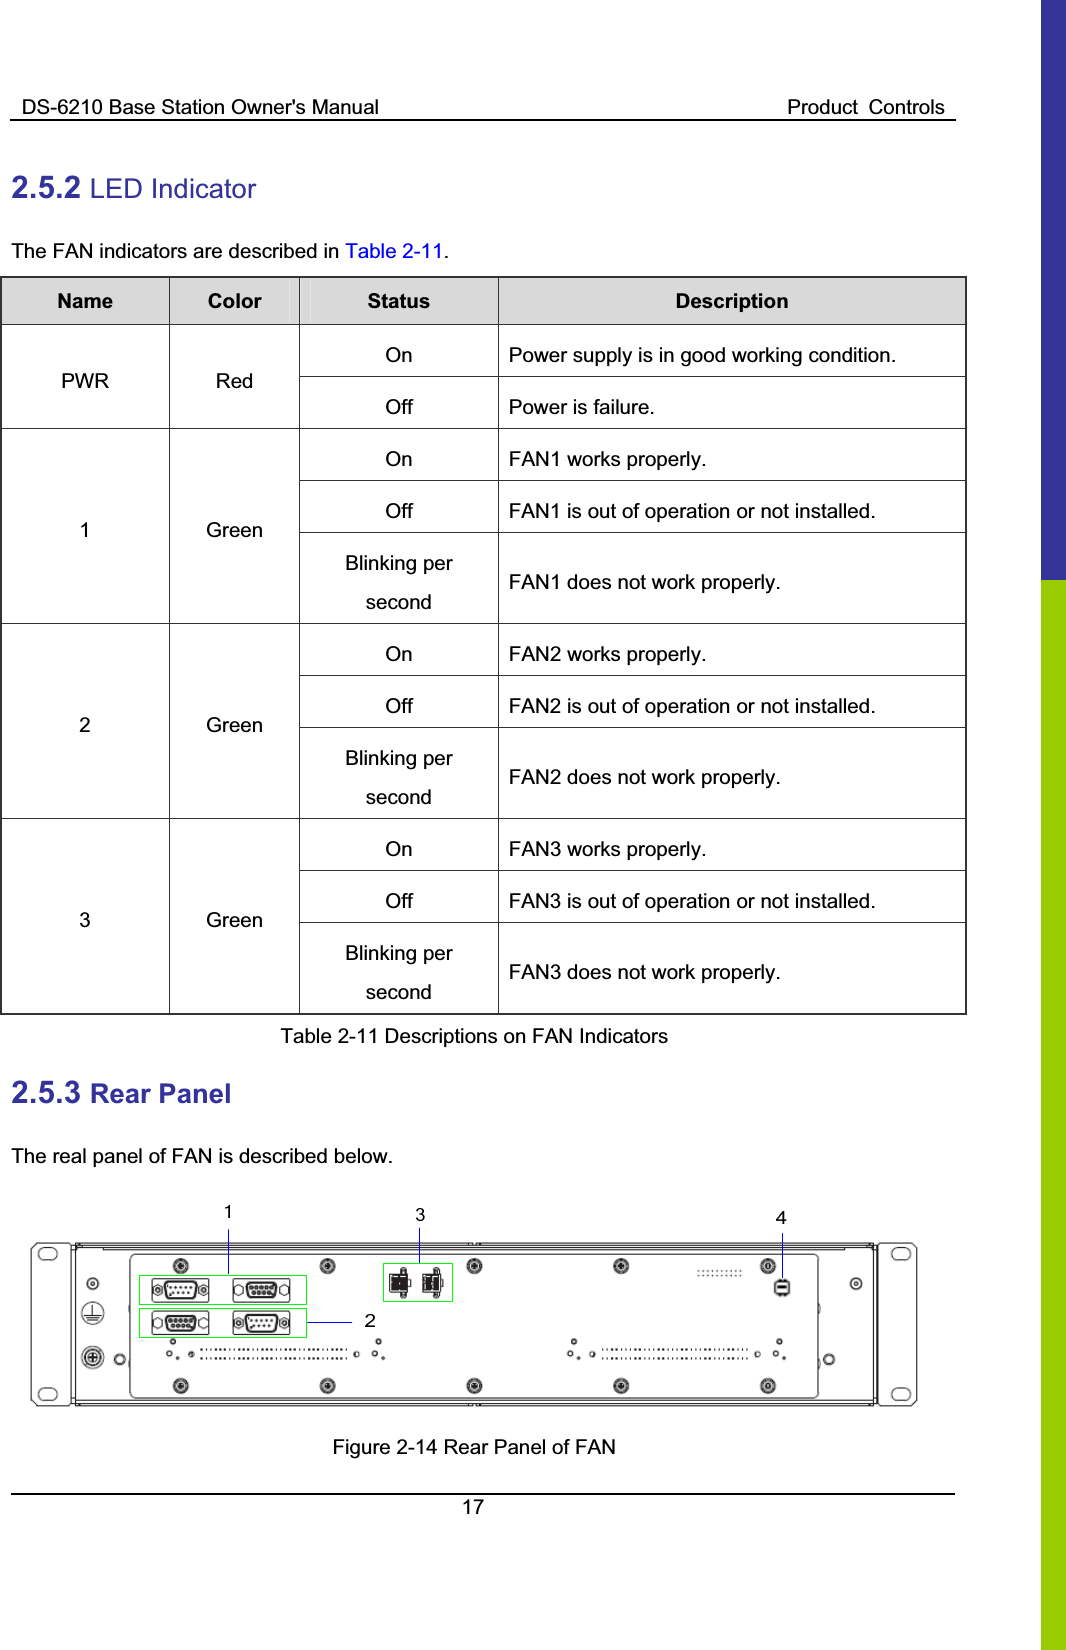 DS-6210 Base Station Owner&apos;s Manual  Product  Controls172.5.2 LED Indicator   The FAN indicators are described in Table 2-11.Name    Color Status Description On    Power supply is in good working condition. PWR  Red Off  Power is failure. On    FAN1 works properly.   Off  FAN1 is out of operation or not installed.   1  Green Blinking per secondFAN1 does not work properly.   On    FAN2 works properly.   Off  FAN2 is out of operation or not installed.   2  Green Blinking per secondFAN2 does not work properly.   On    FAN3 works properly.   Off  FAN3 is out of operation or not installed.   3  Green Blinking per secondFAN3 does not work properly.   Table 2-11 Descriptions on FAN Indicators 2.5.3 Rear Panel   The real panel of FAN is described below.   Figure 2-14 Rear Panel of FAN 